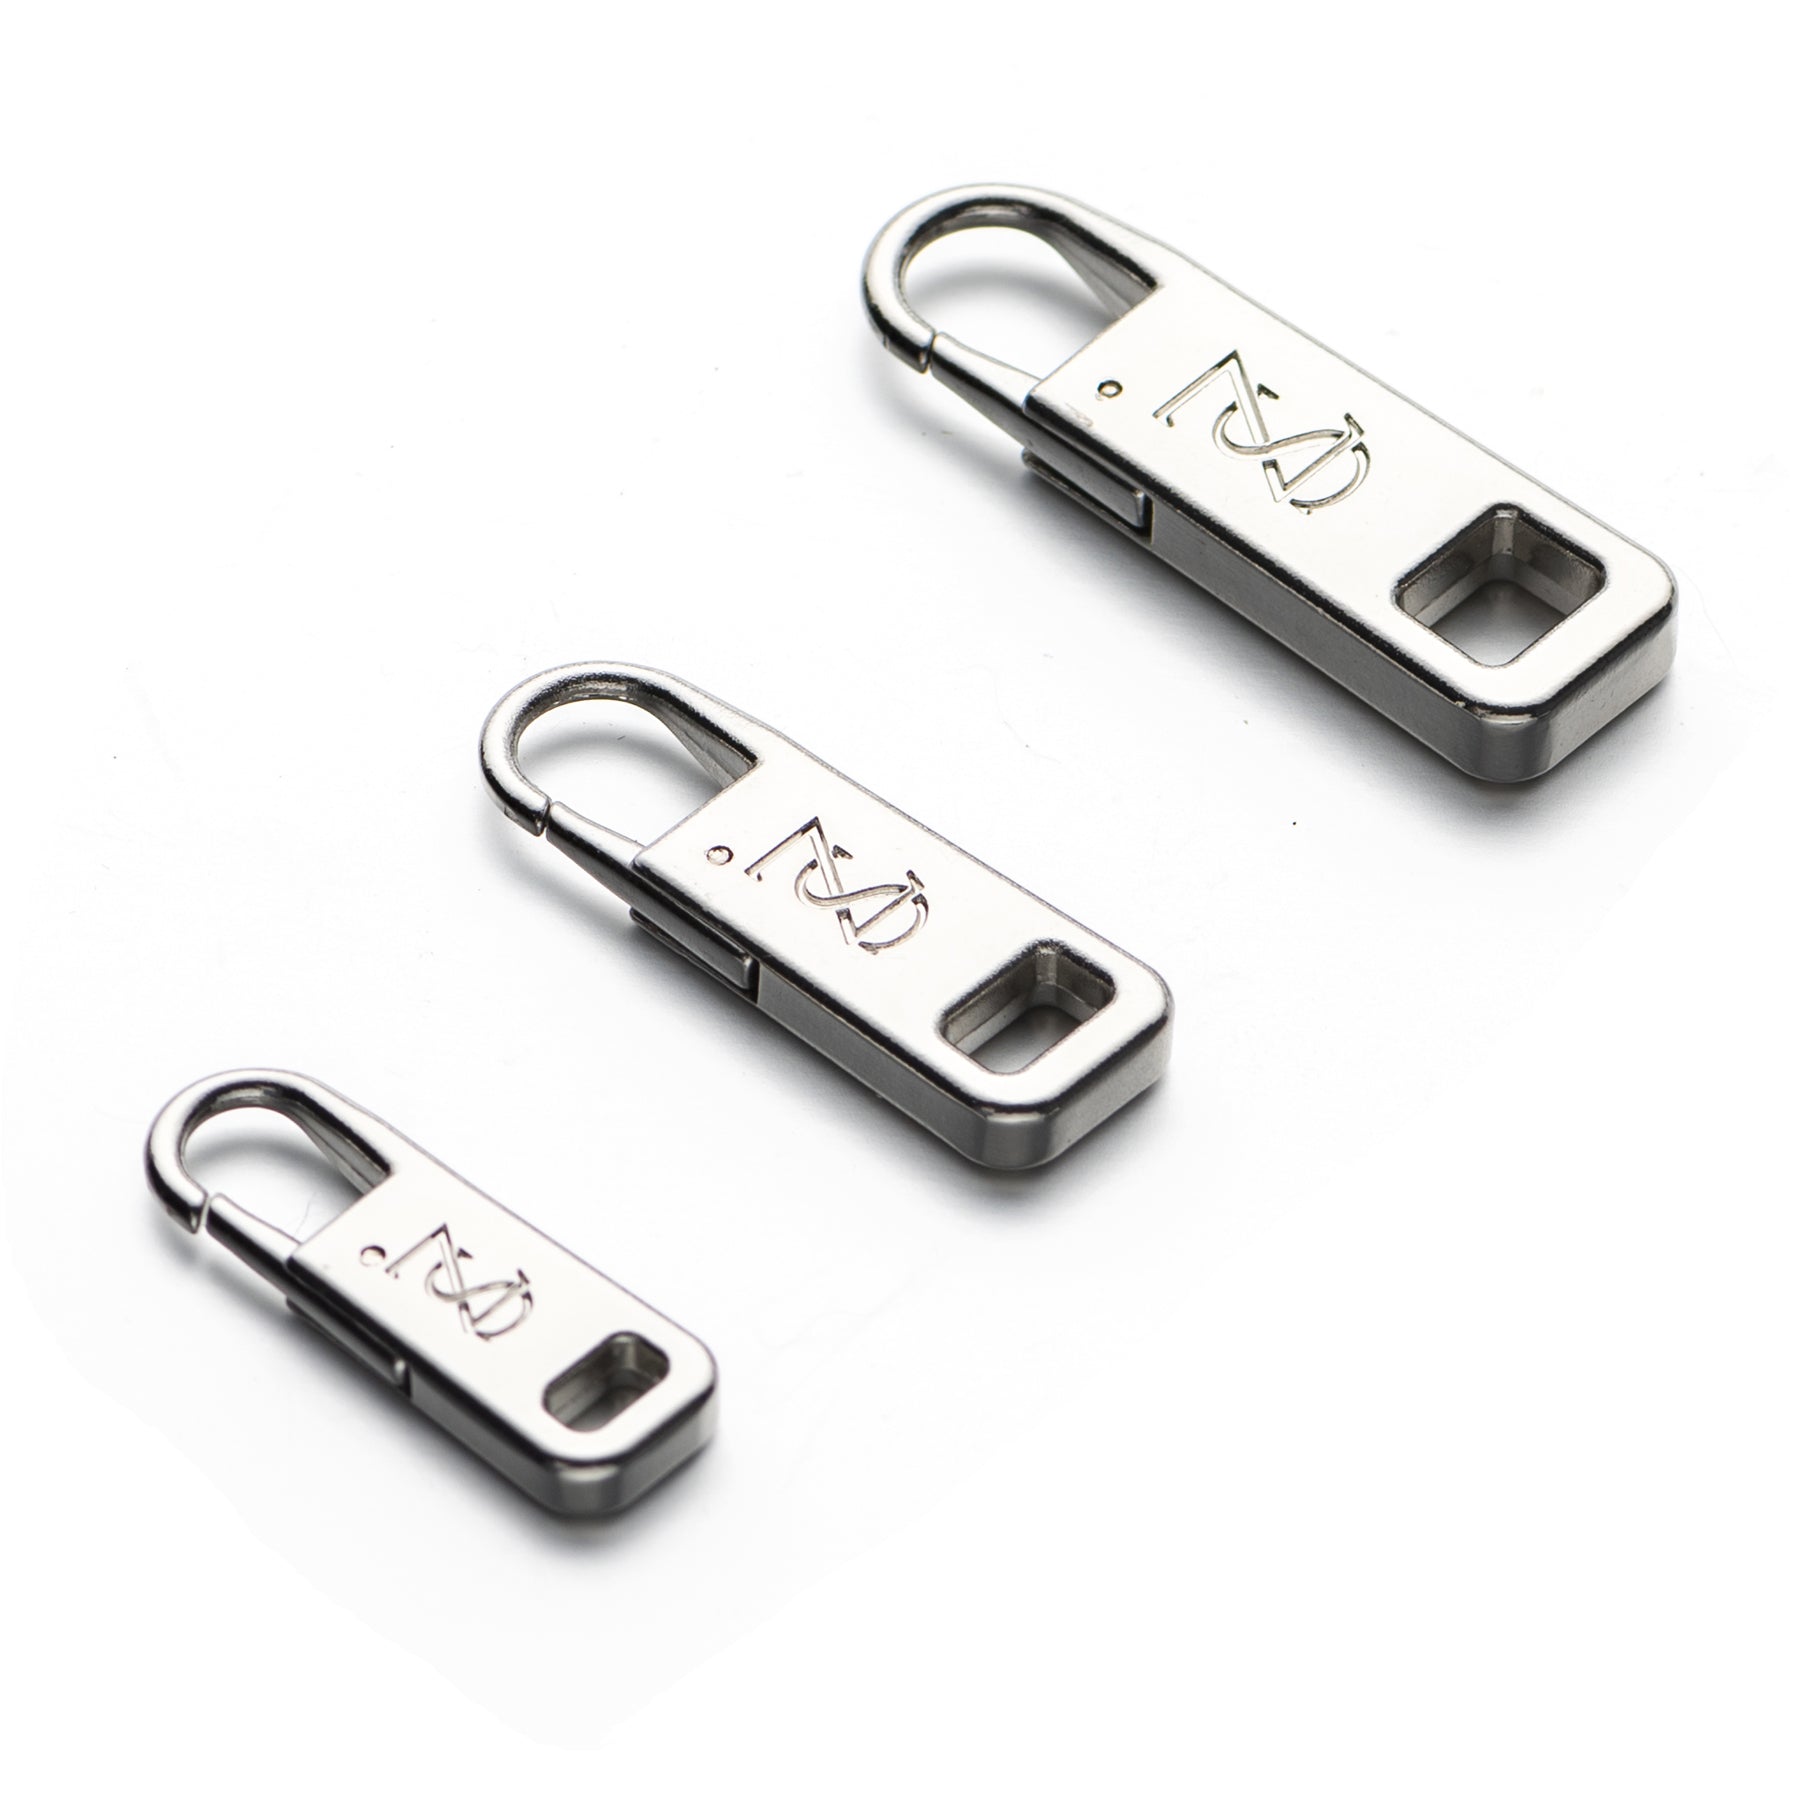 3 Size Luggage Zipper Pulls Replacement – zpsolution